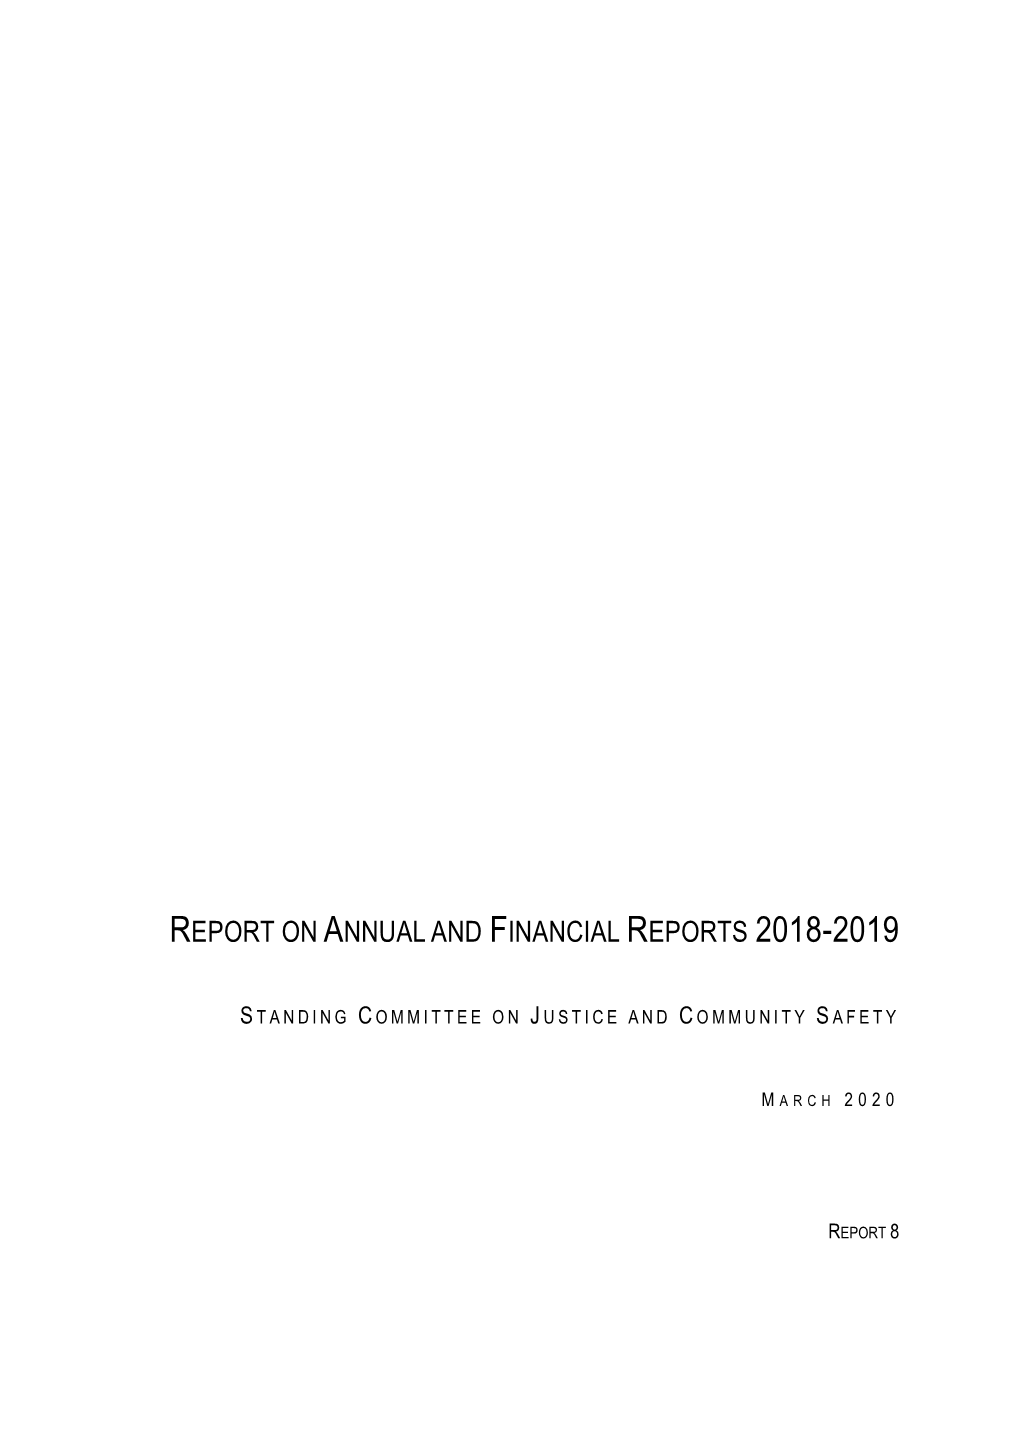 Report on Annual and Financial Reports 2018-2019